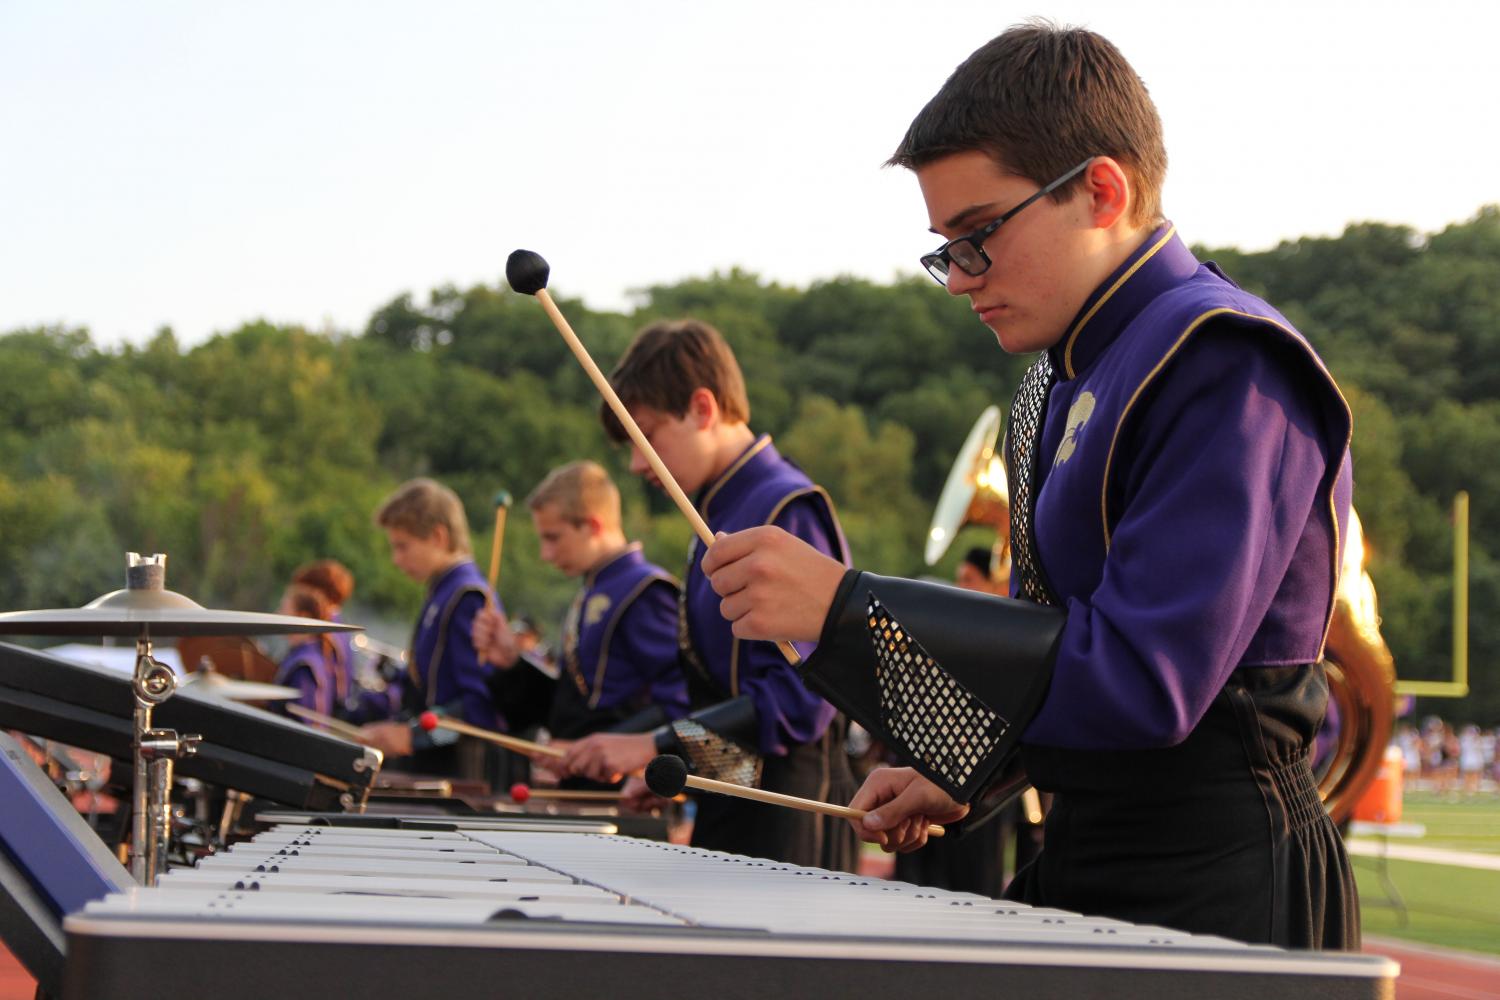 Cole Huntley plays the vibraphone during On Eureka, at the beginning of the varsity football game against Pattonville, Sept. 1. My favorite part of preforming at the games is showing everyone what weve been learning by playing the show music, Huntley said. After practicing for hours on marching and music, the shows give us time to piece it all together and show people how hard we work. 